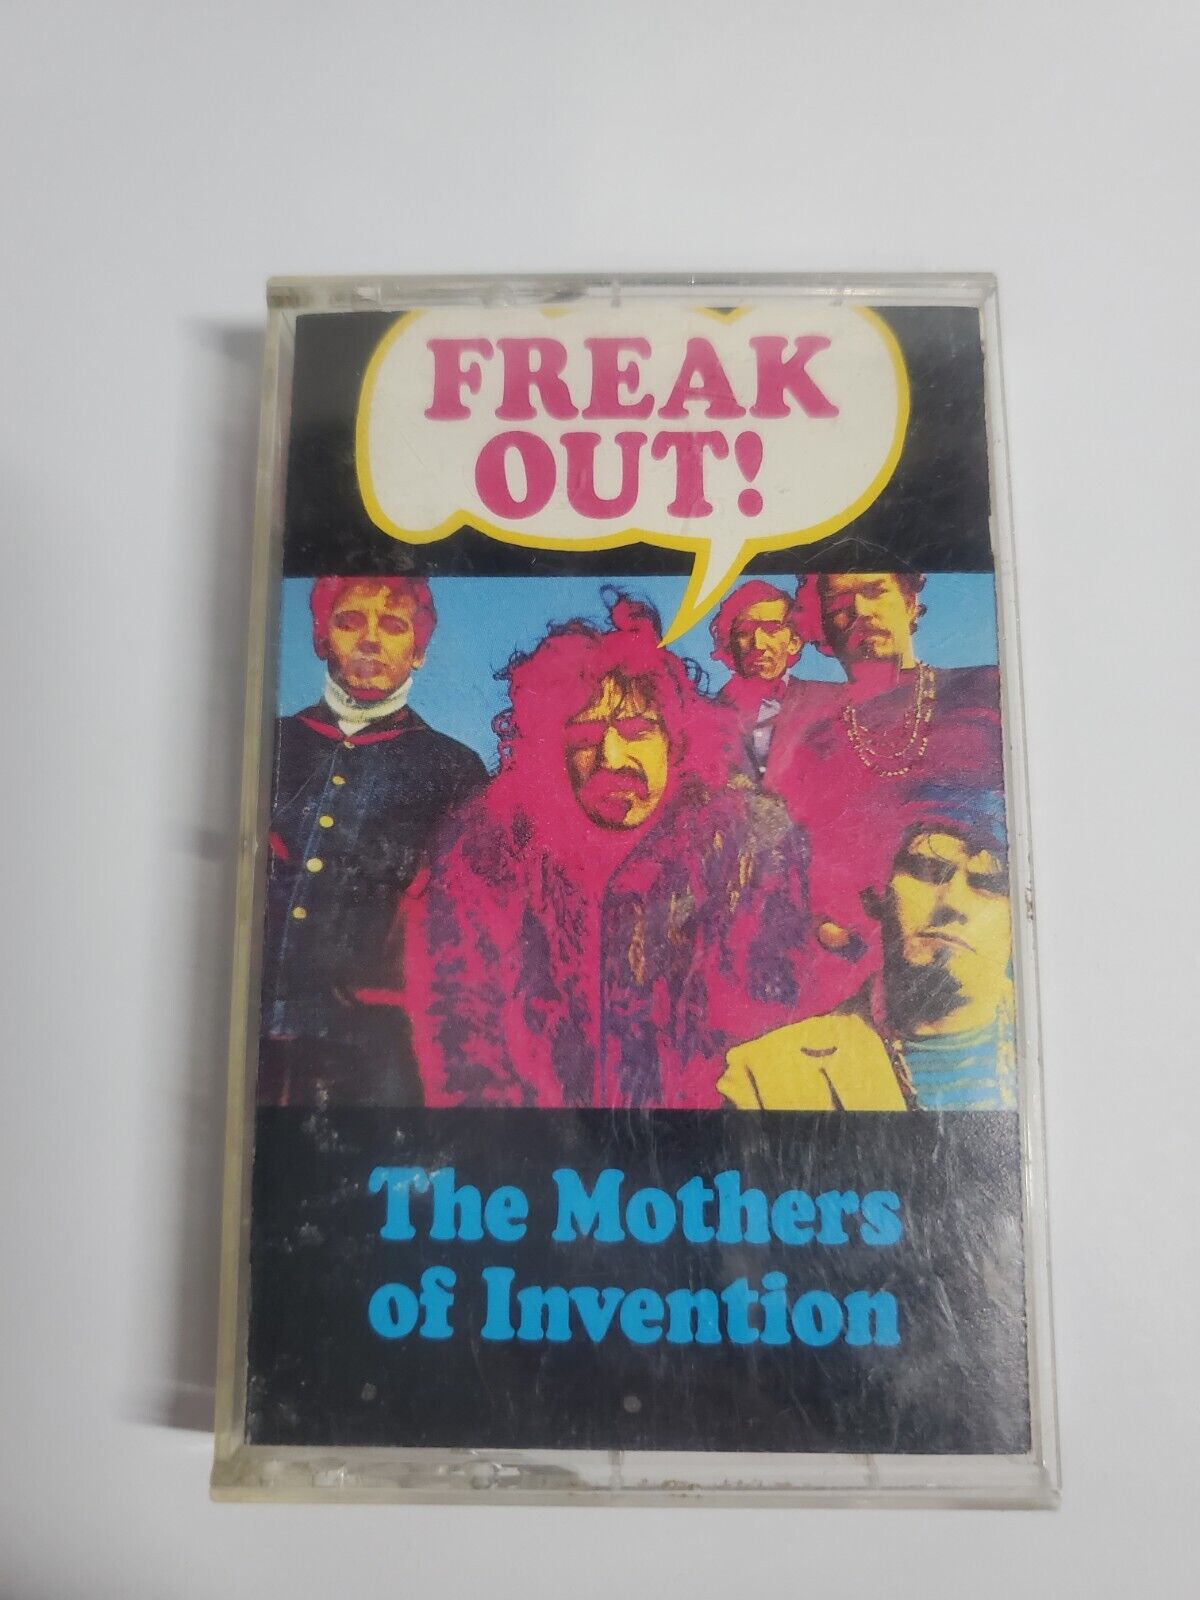 Frank Zappa - Freak Out! cassette tape The Mothers Of Invention. 